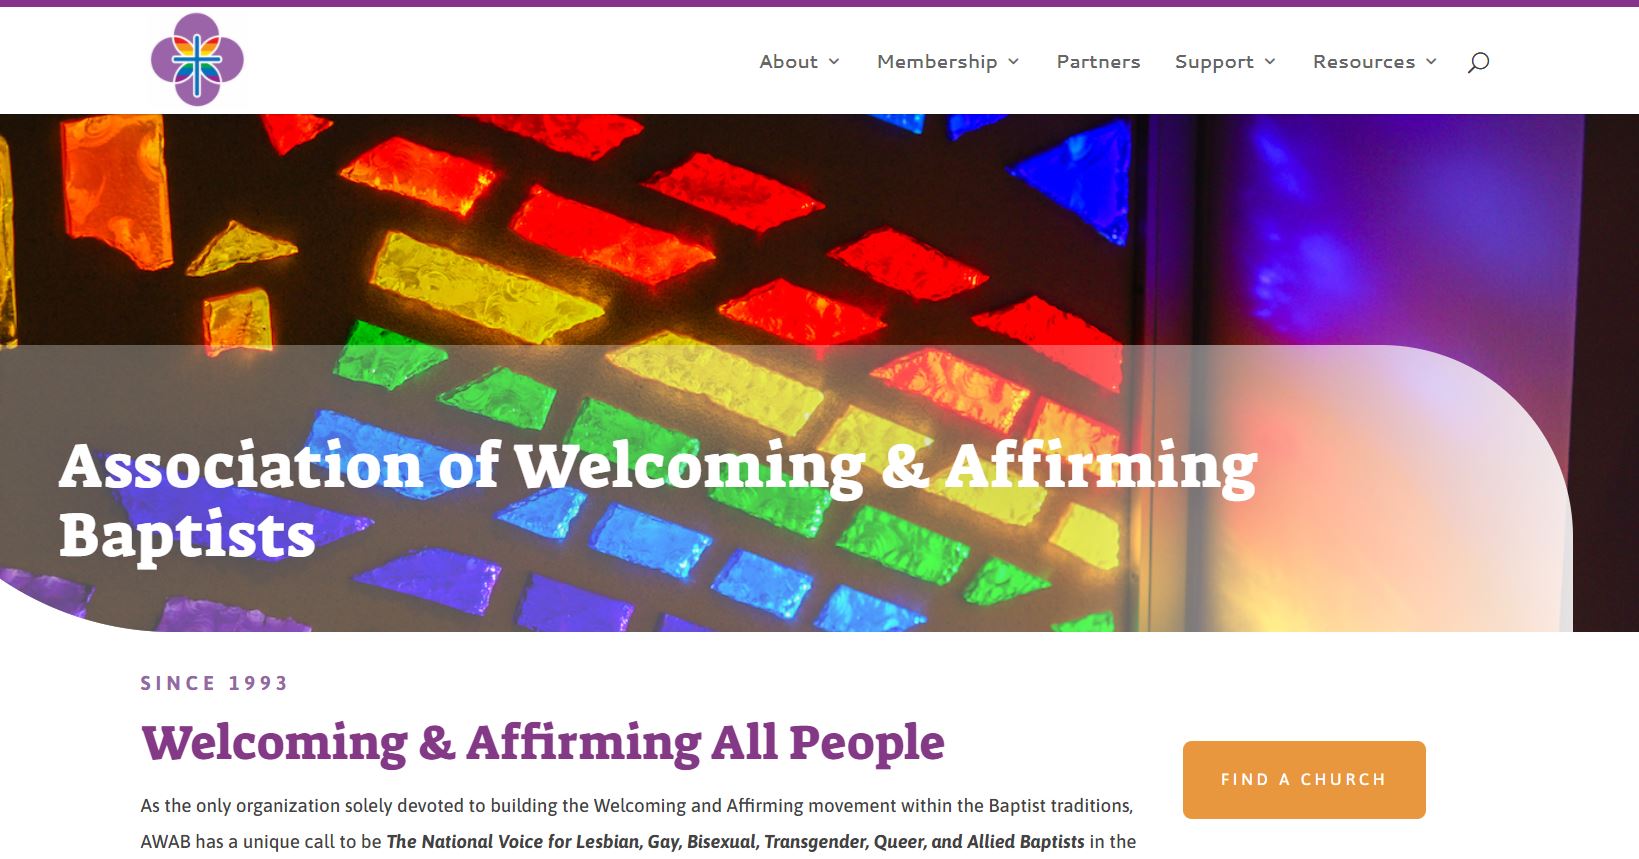 Association of Welcoming & Affirming Baptists